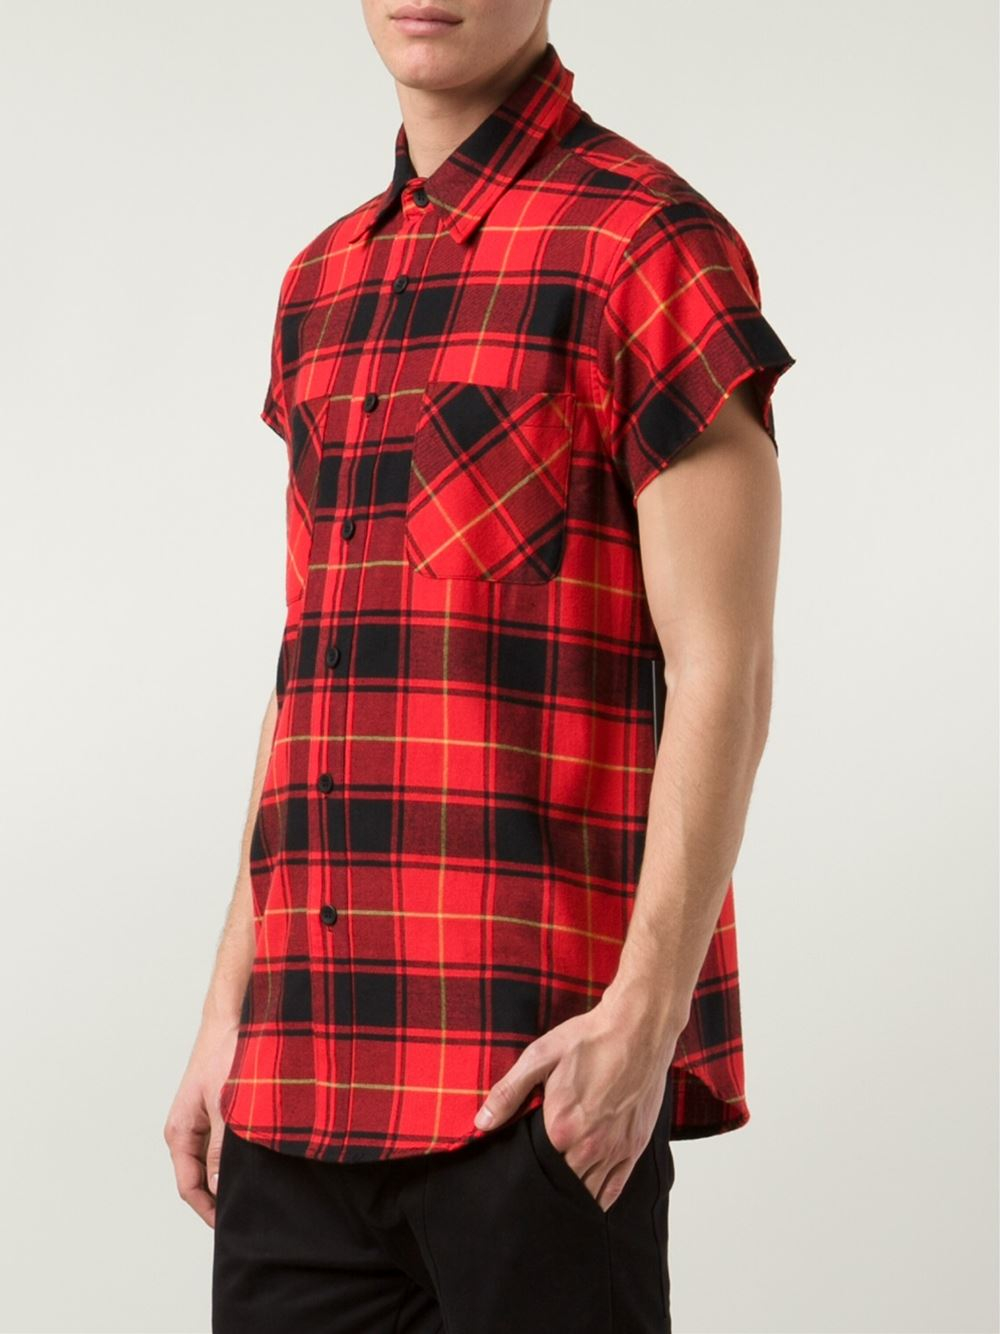 Fear Of God Short Sleeve Plaid Shirt in Red for Men - Lyst